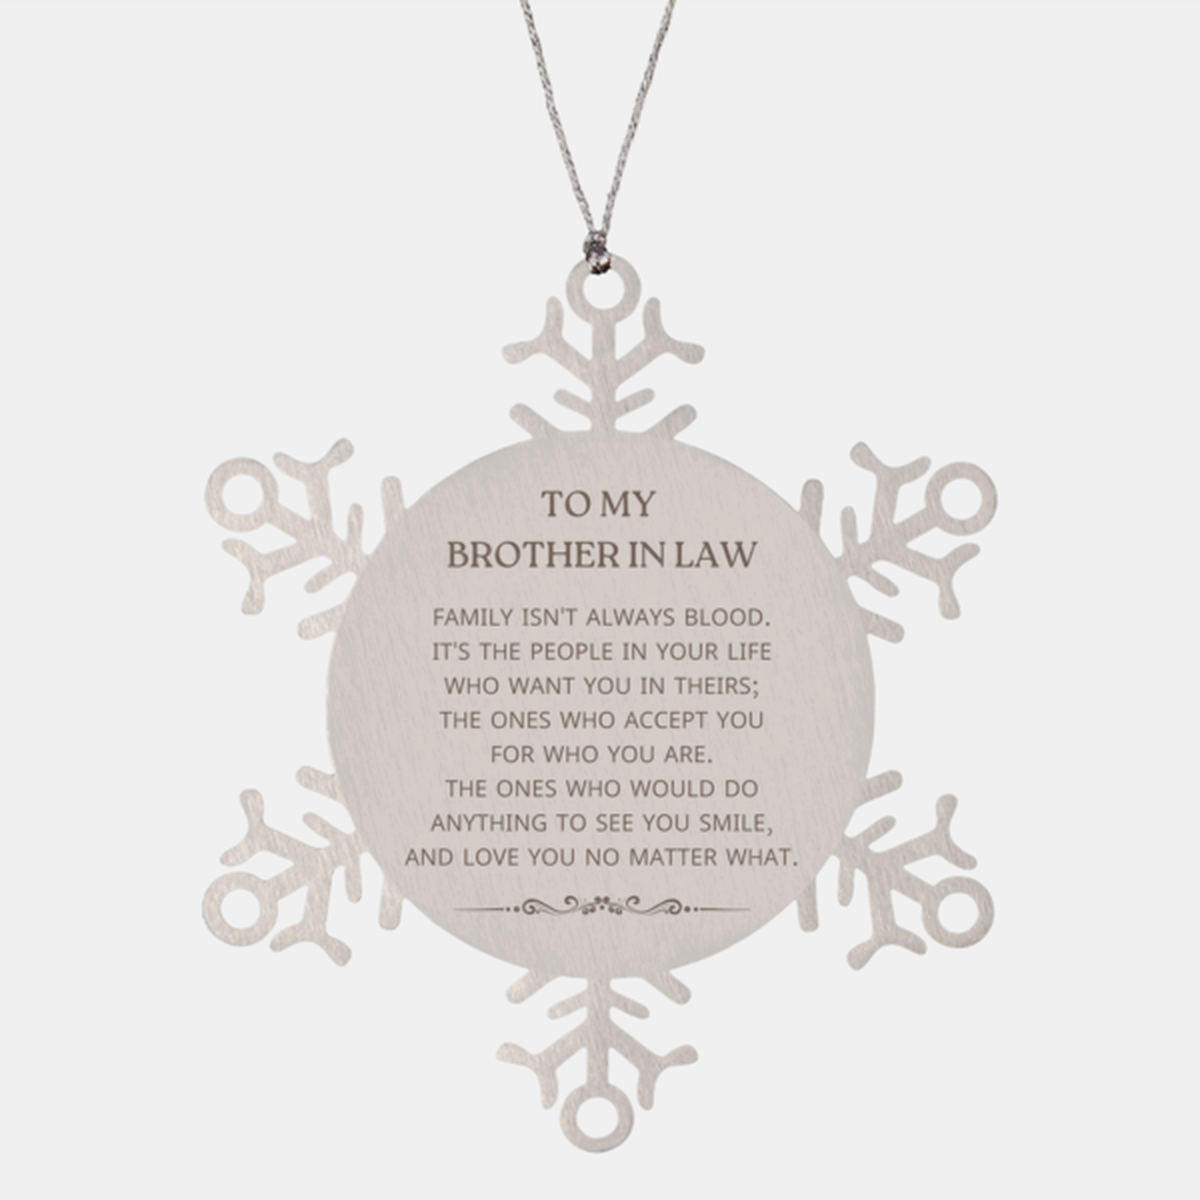 To My Brother In Law Gifts, Family isn't always blood, Brother In Law Snowflake Ornament, Birthday Christmas Unique Present For Brother In Law